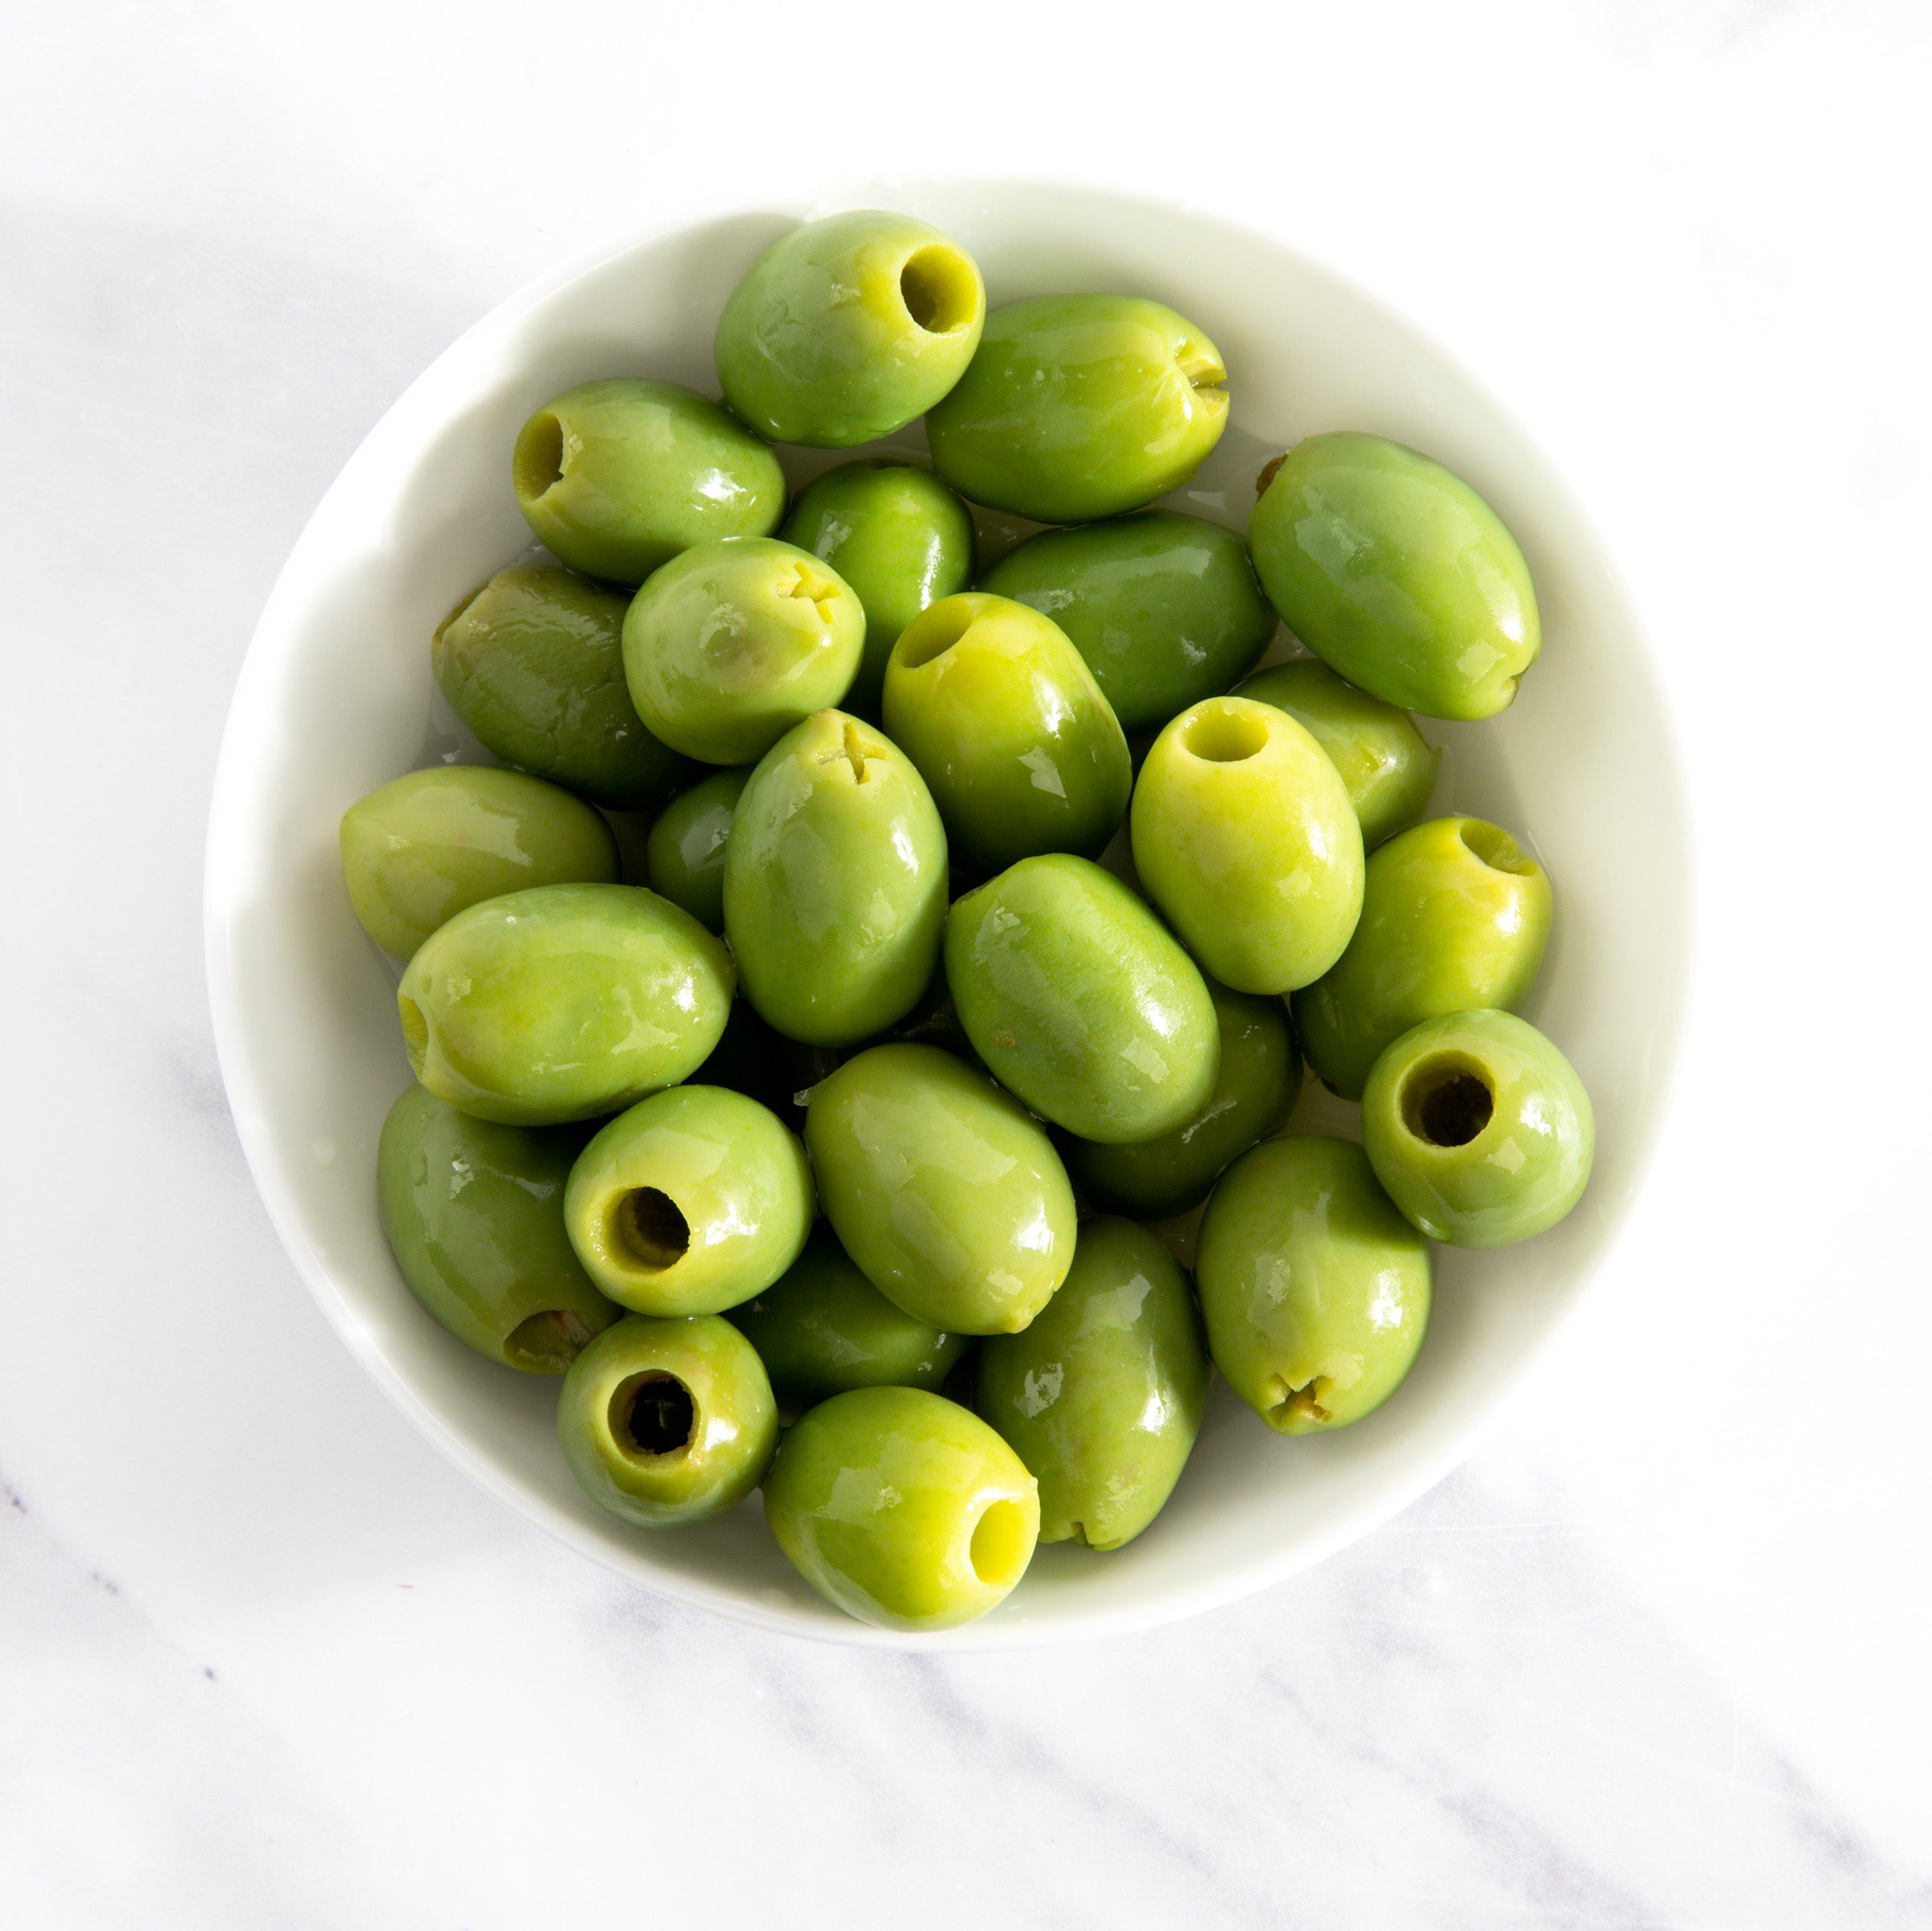 Pitted Frescatrano Olives from Greece/Divina/Olives & Antipasti